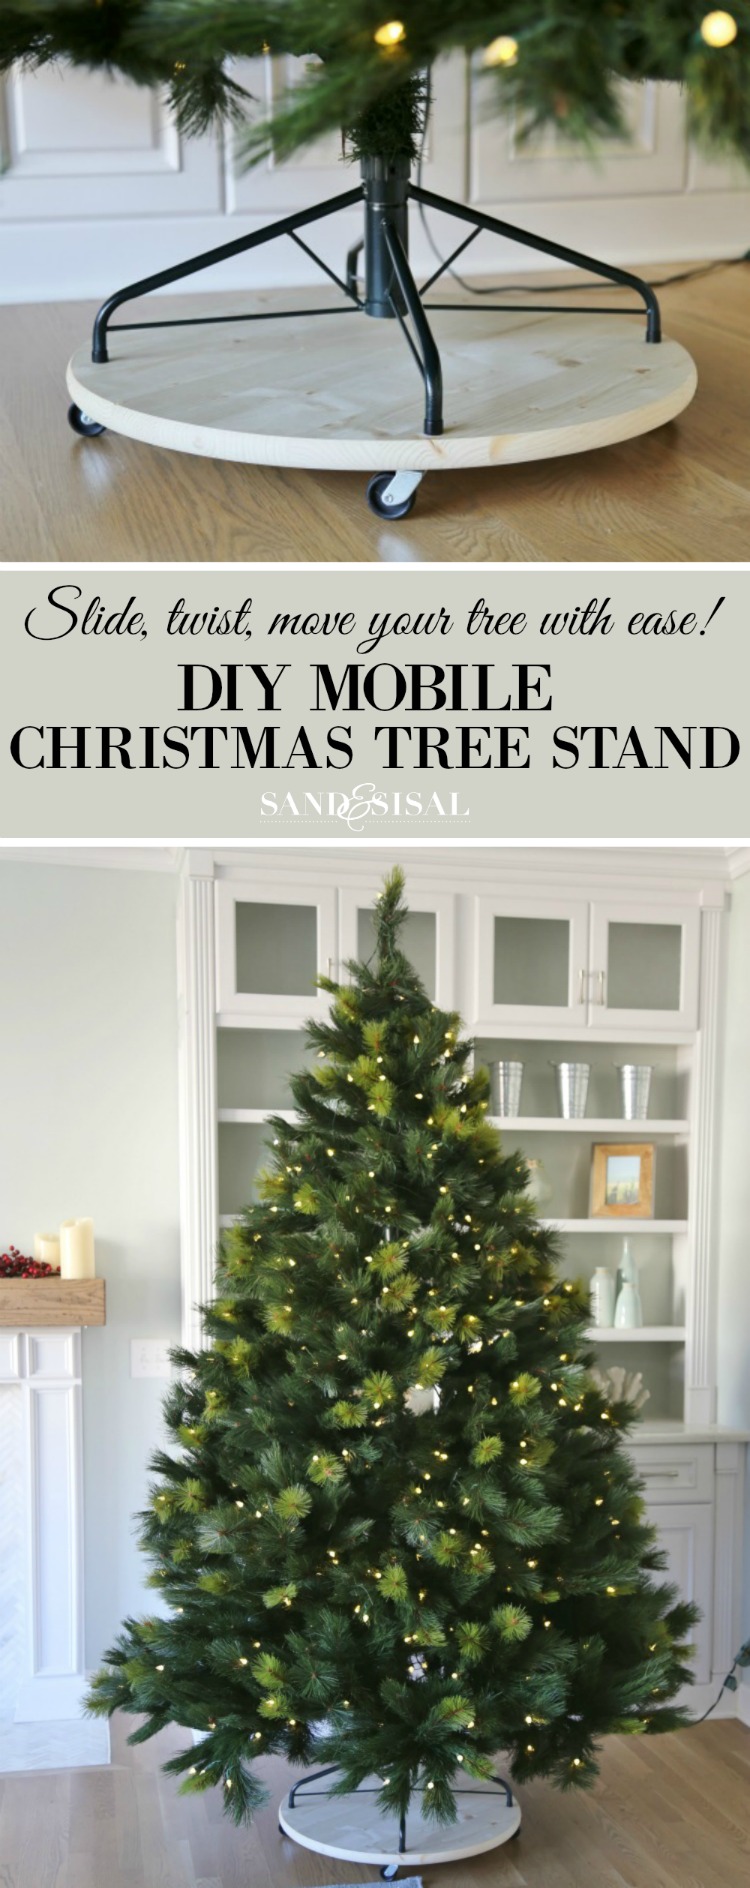 DIY Mobile Christmas Tree Stand. Slide, twist, or move your tree with ease with this simple and inexpensive project. 